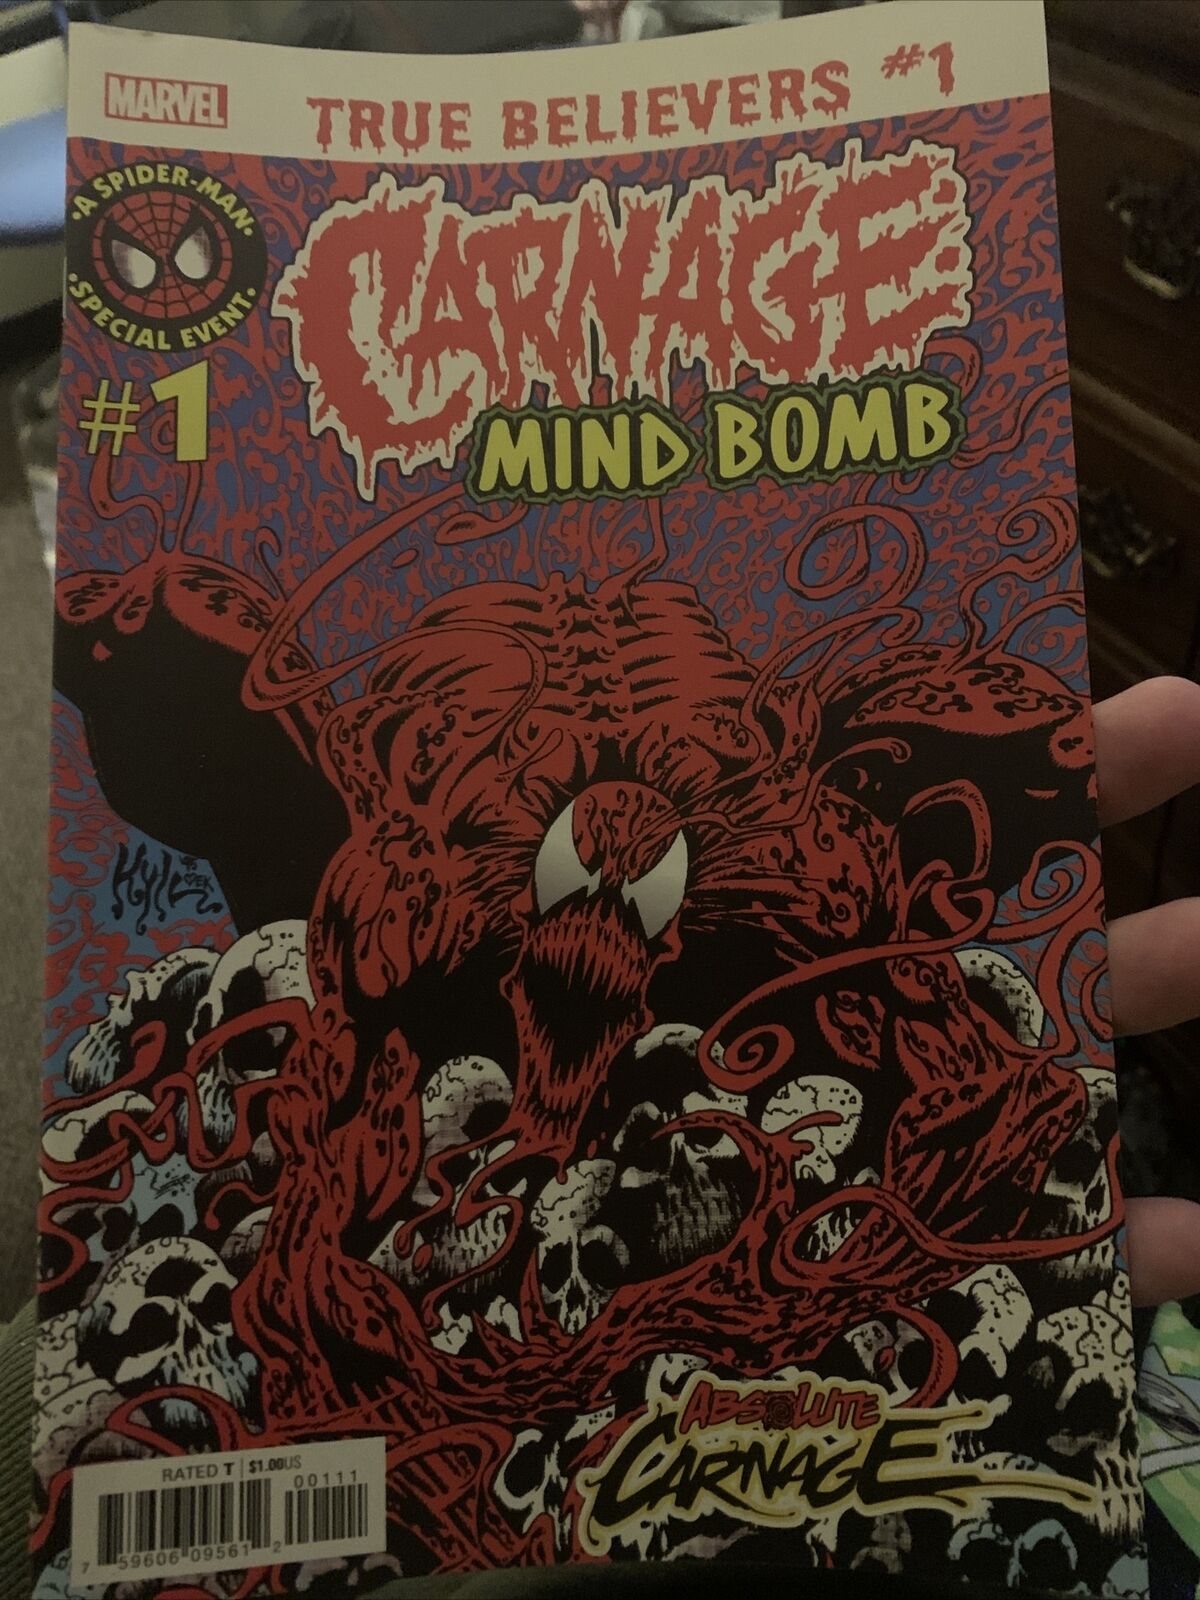 True Believers: Absolute Carnage - Mind Bomb #1 | Reprints Carnage Mind Bomb #1